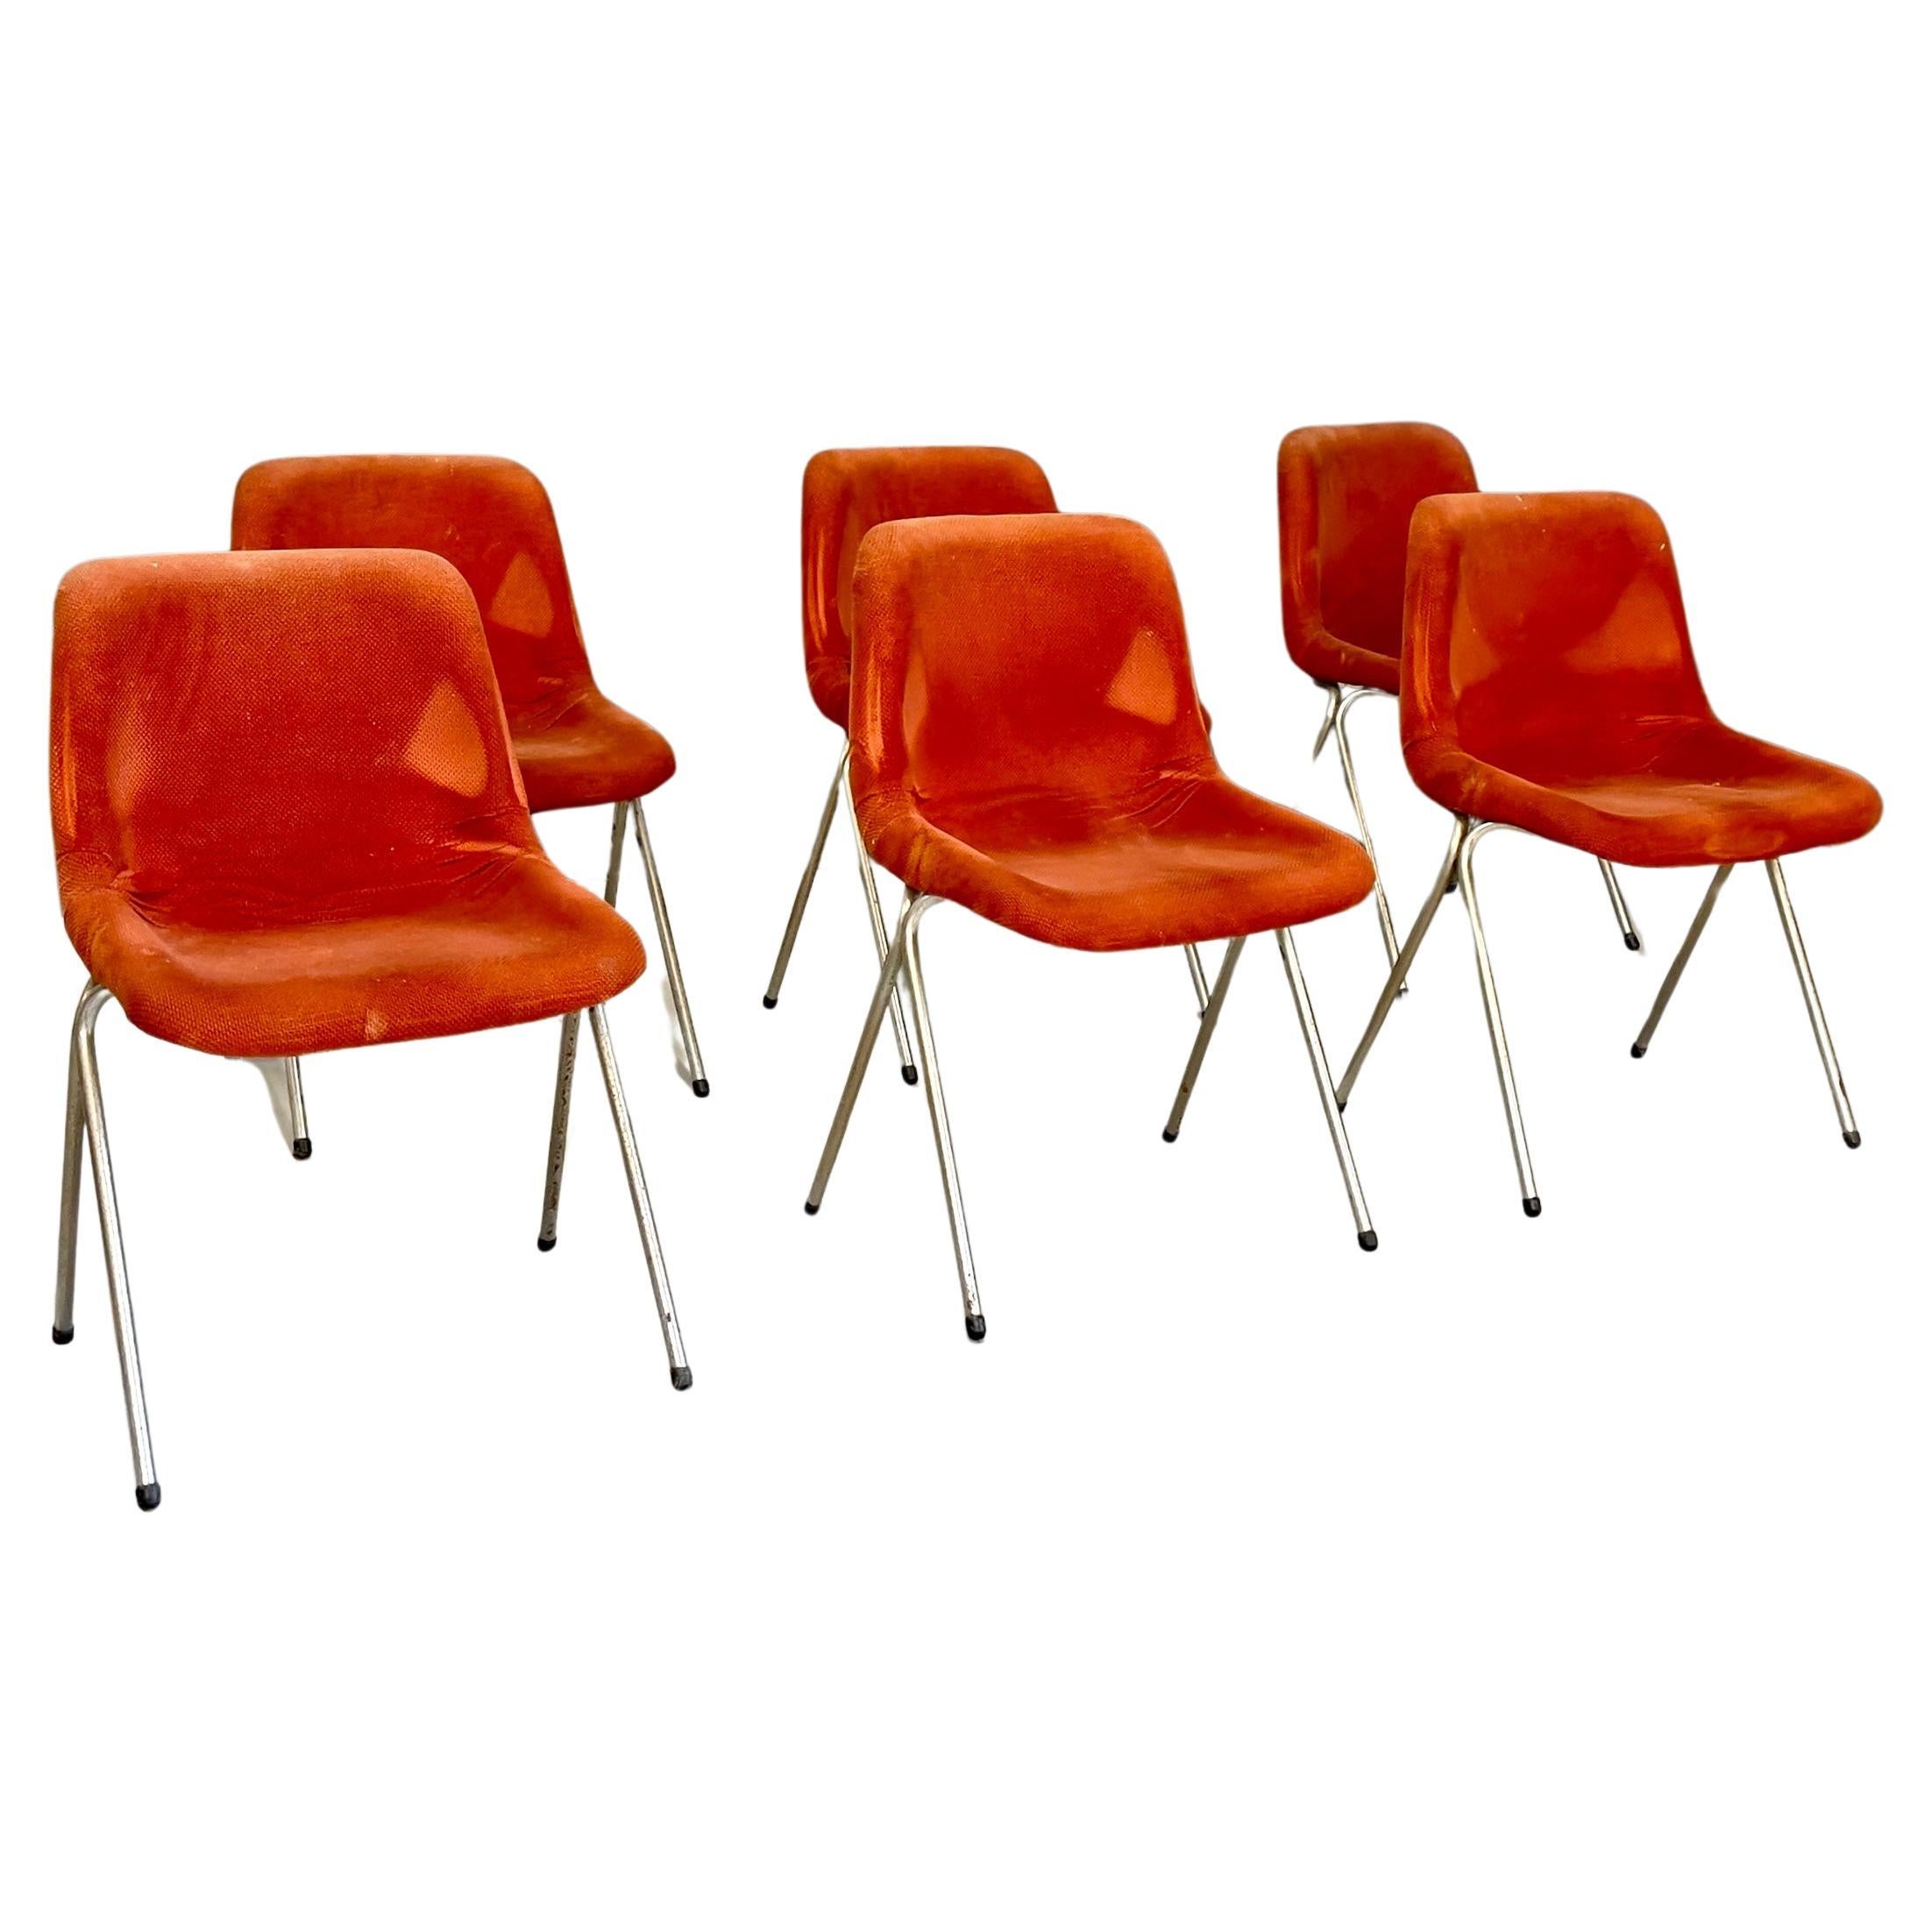 Six Chairs, 1960s For Sale